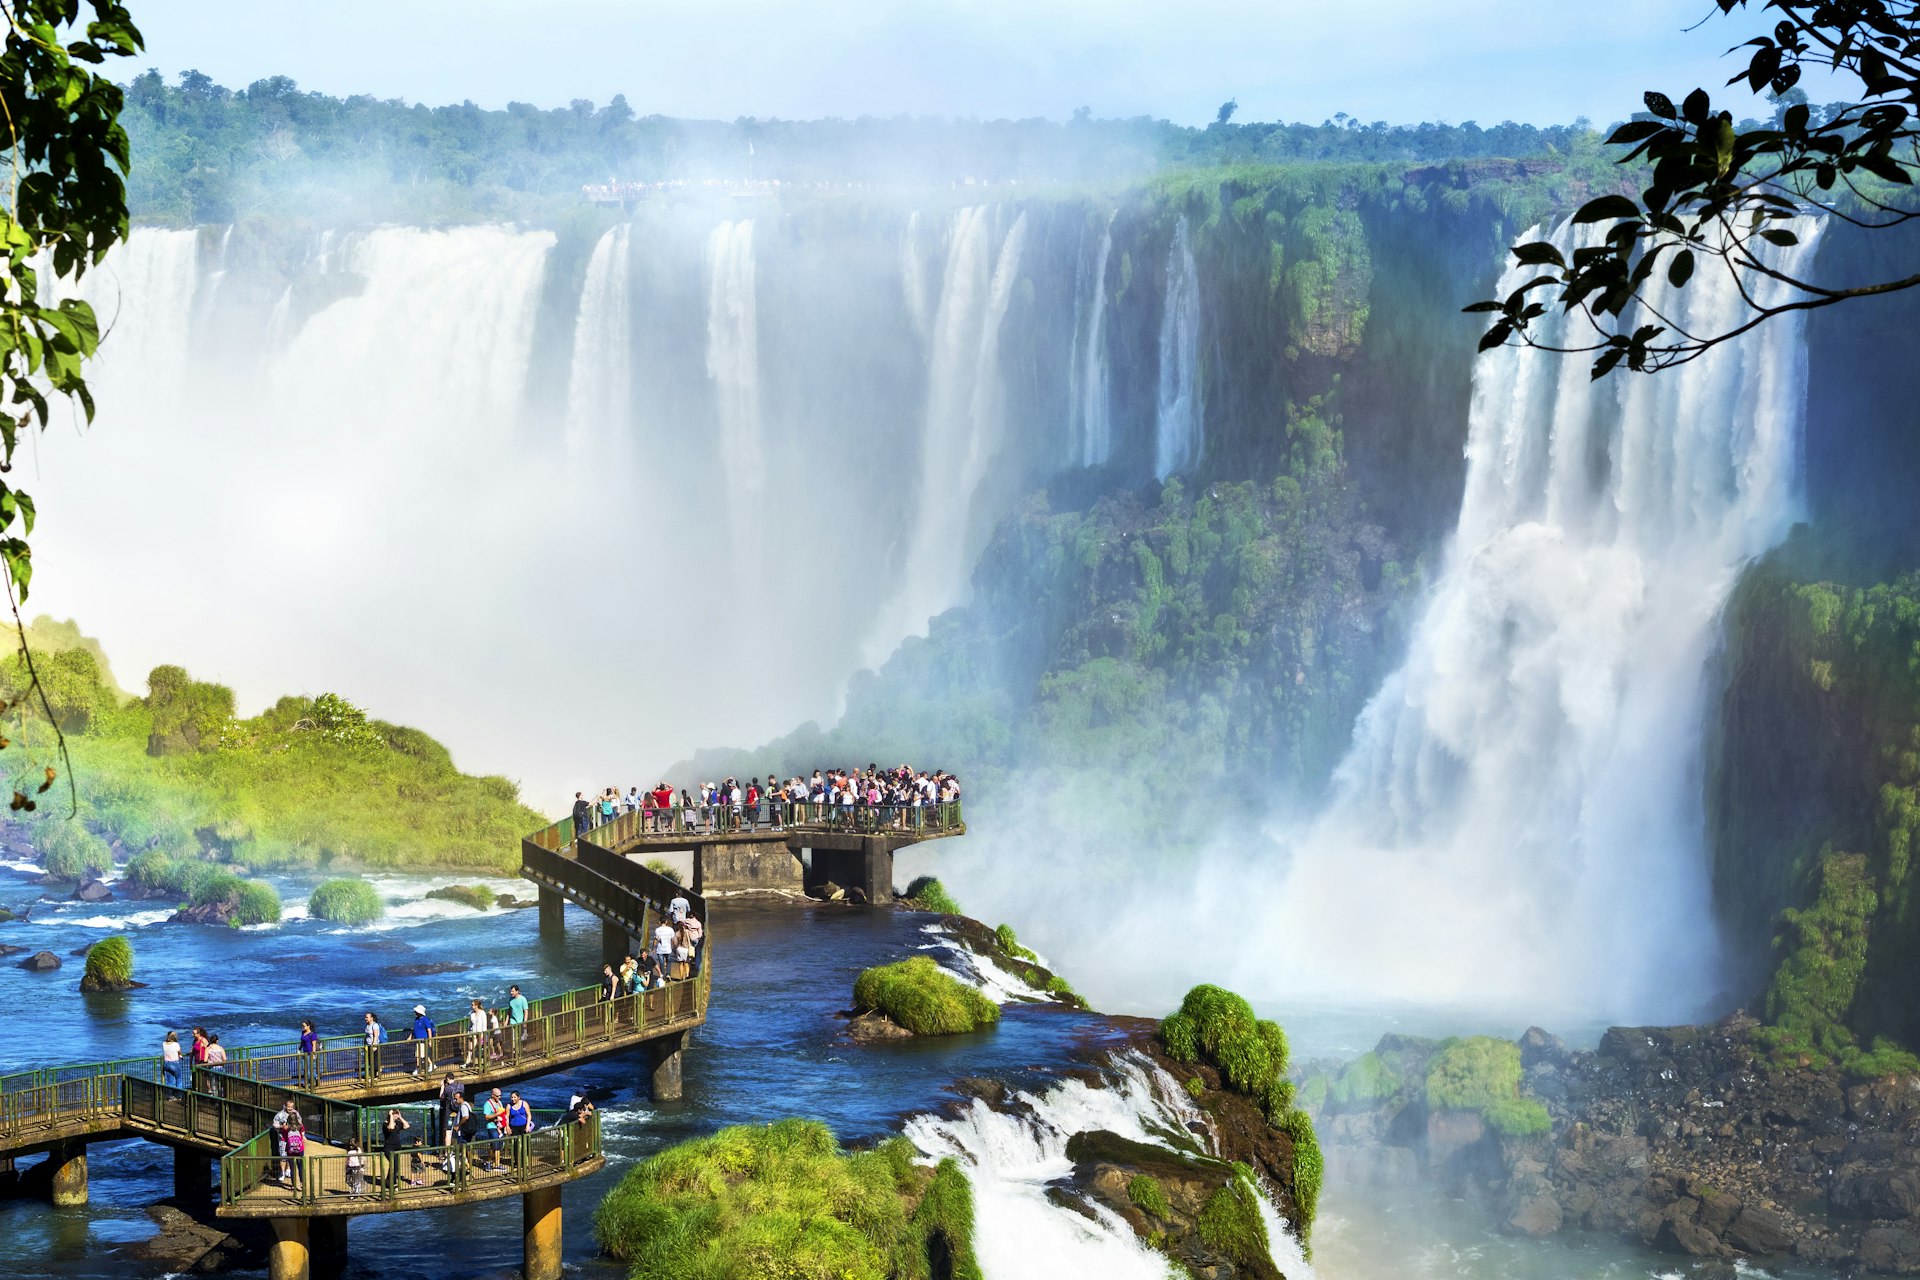 Tourists at Iguazu Falls on the border of Brazil and Argentina